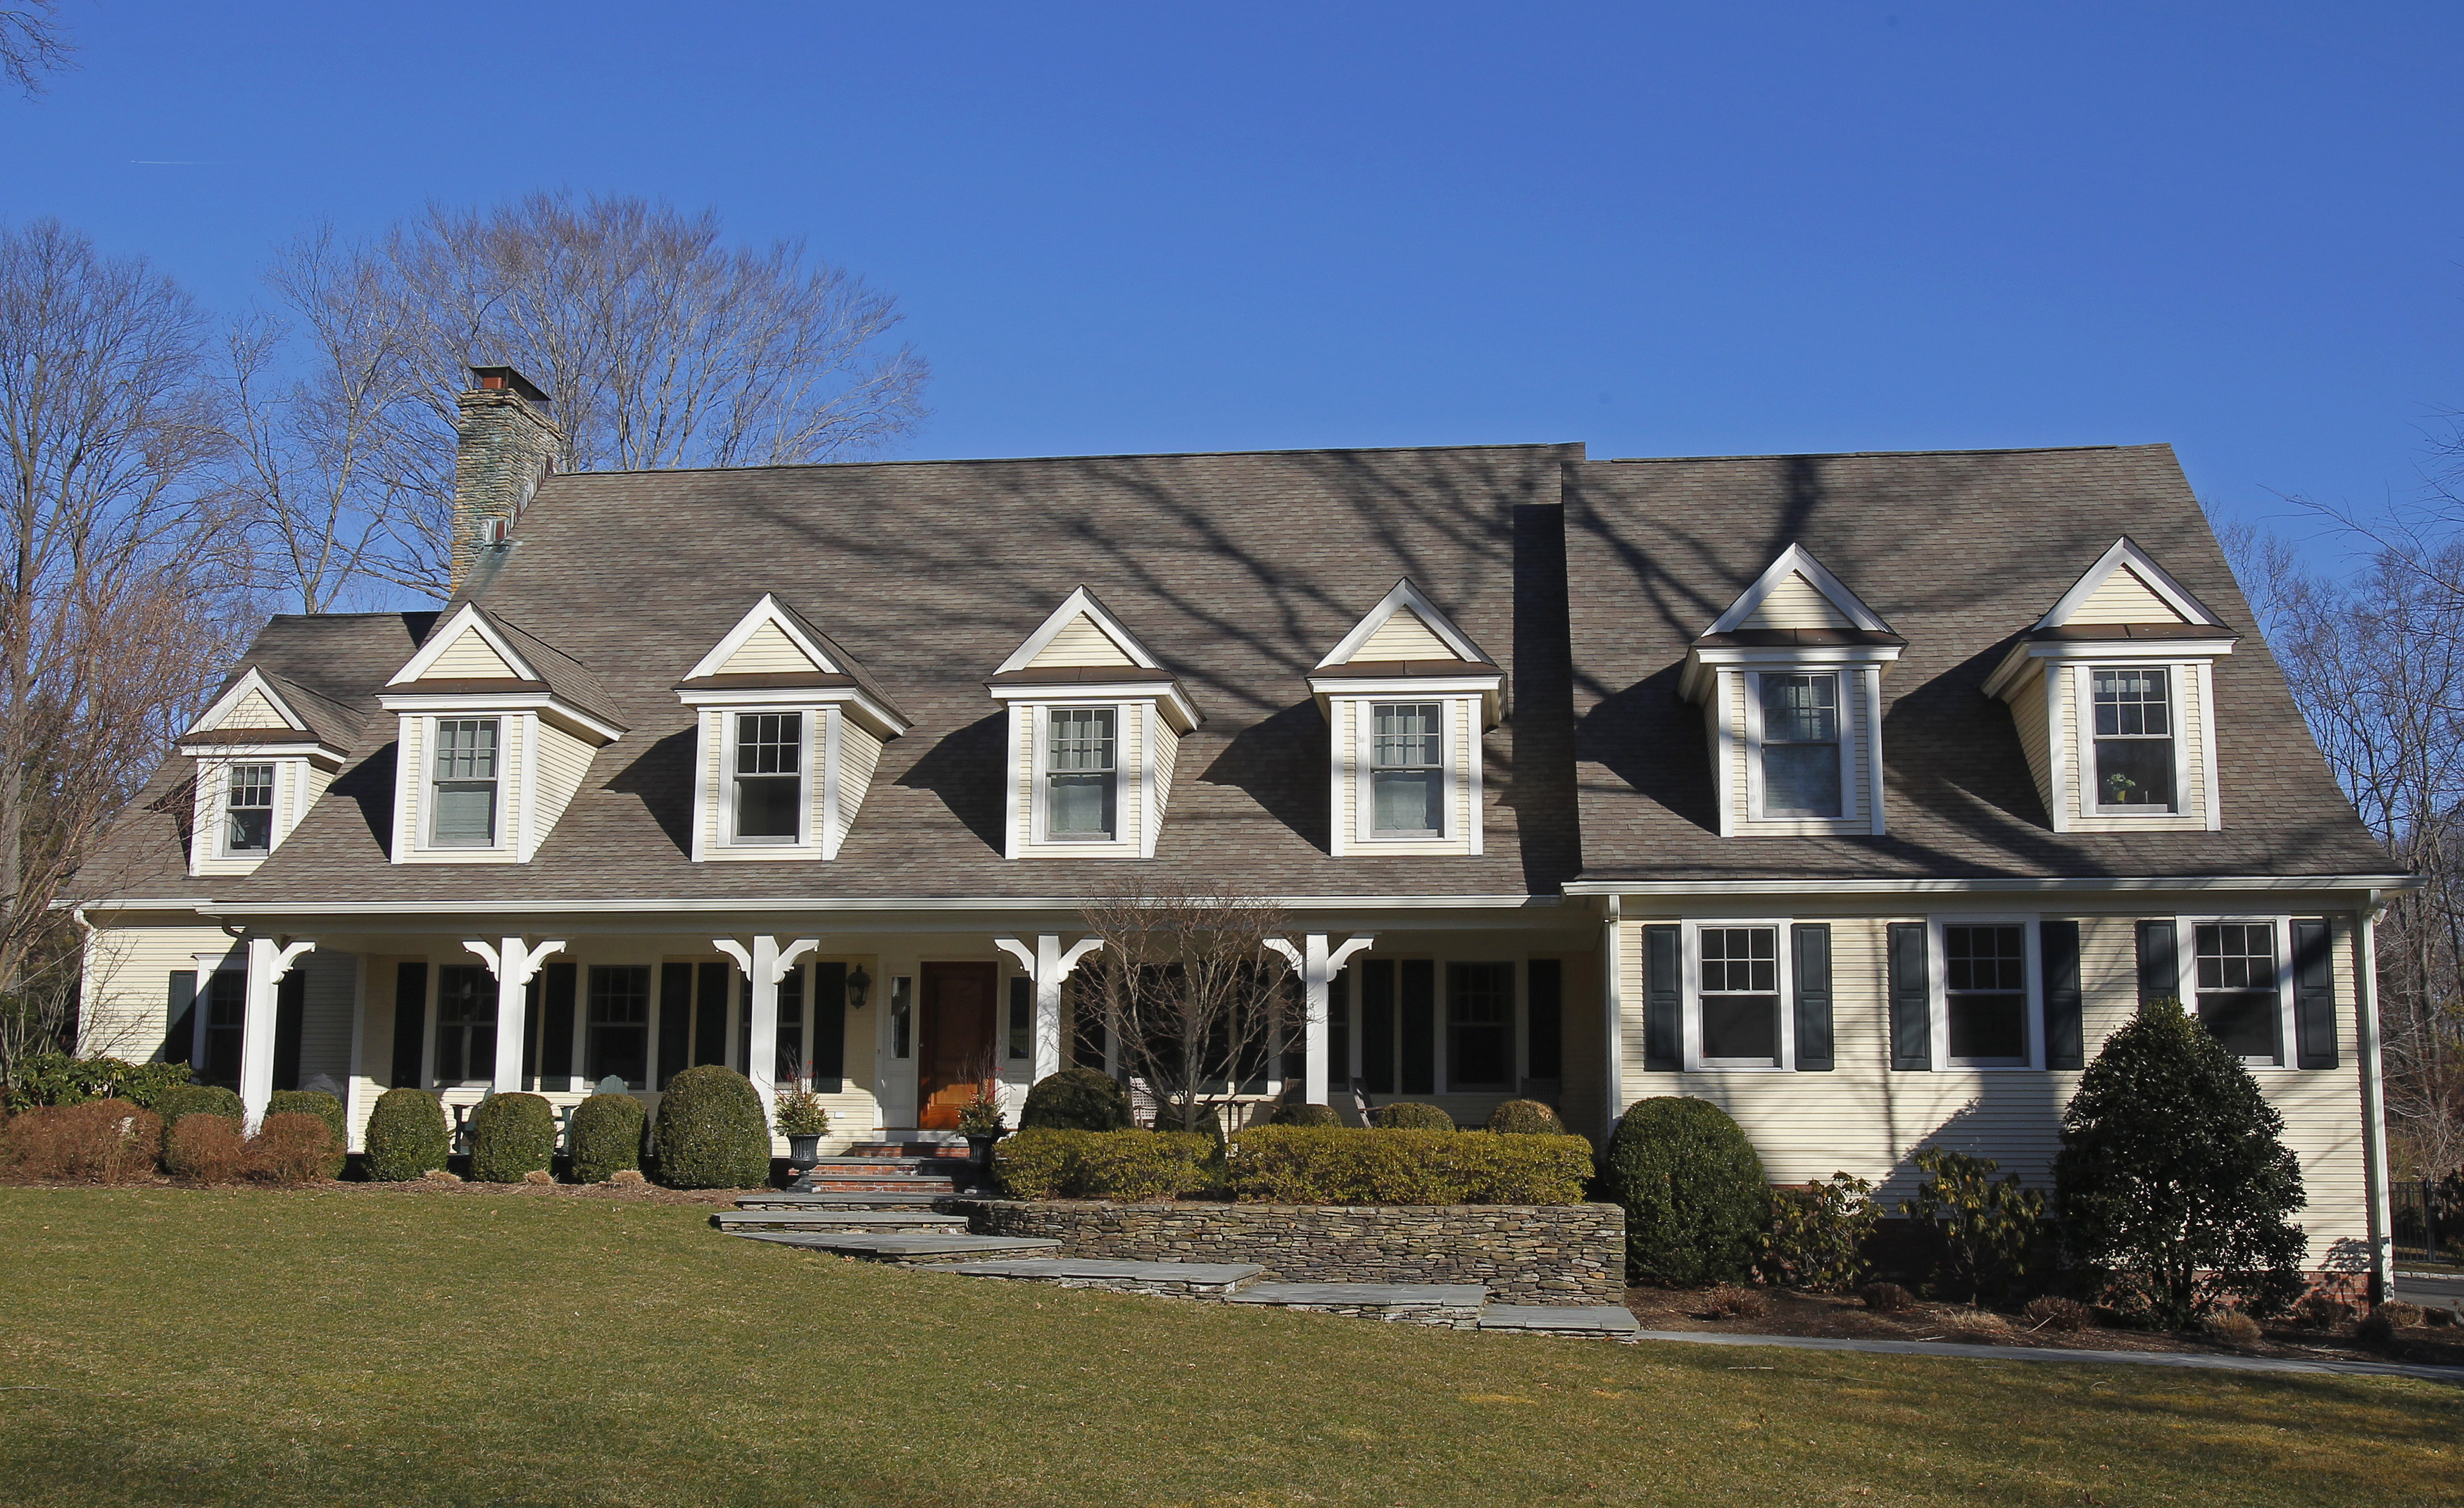 The home of Morgan Stanley investment banker, William Bryan Jennings, is seen in Darien, Connecticut on March 6, 2012. (Adam Hunger—Reuters)